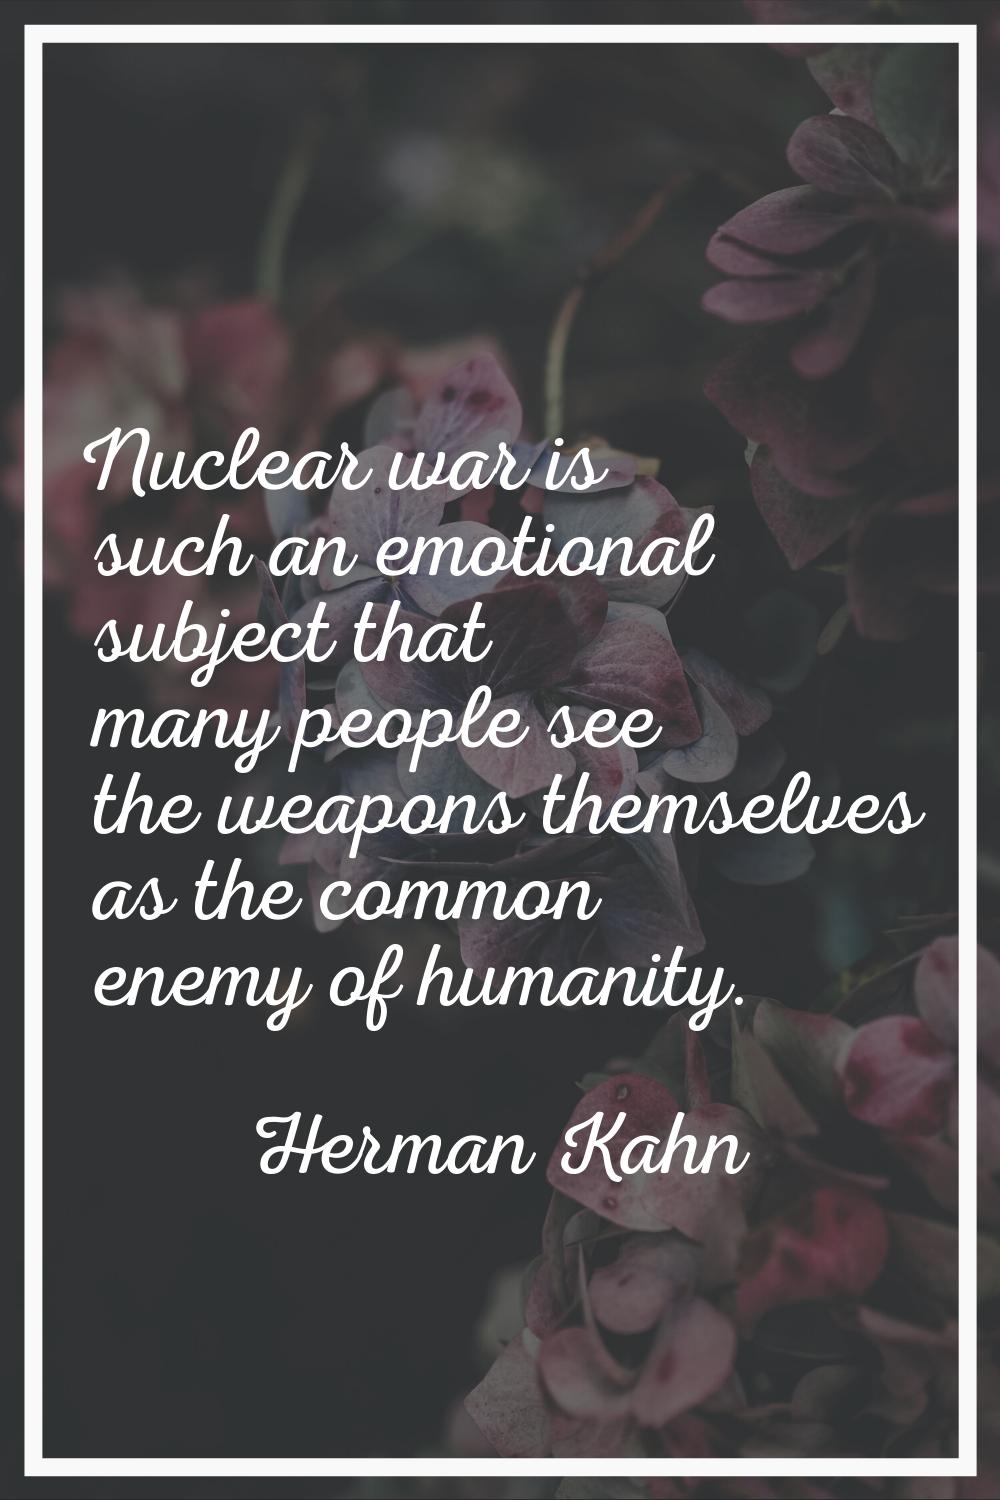 Nuclear war is such an emotional subject that many people see the weapons themselves as the common 